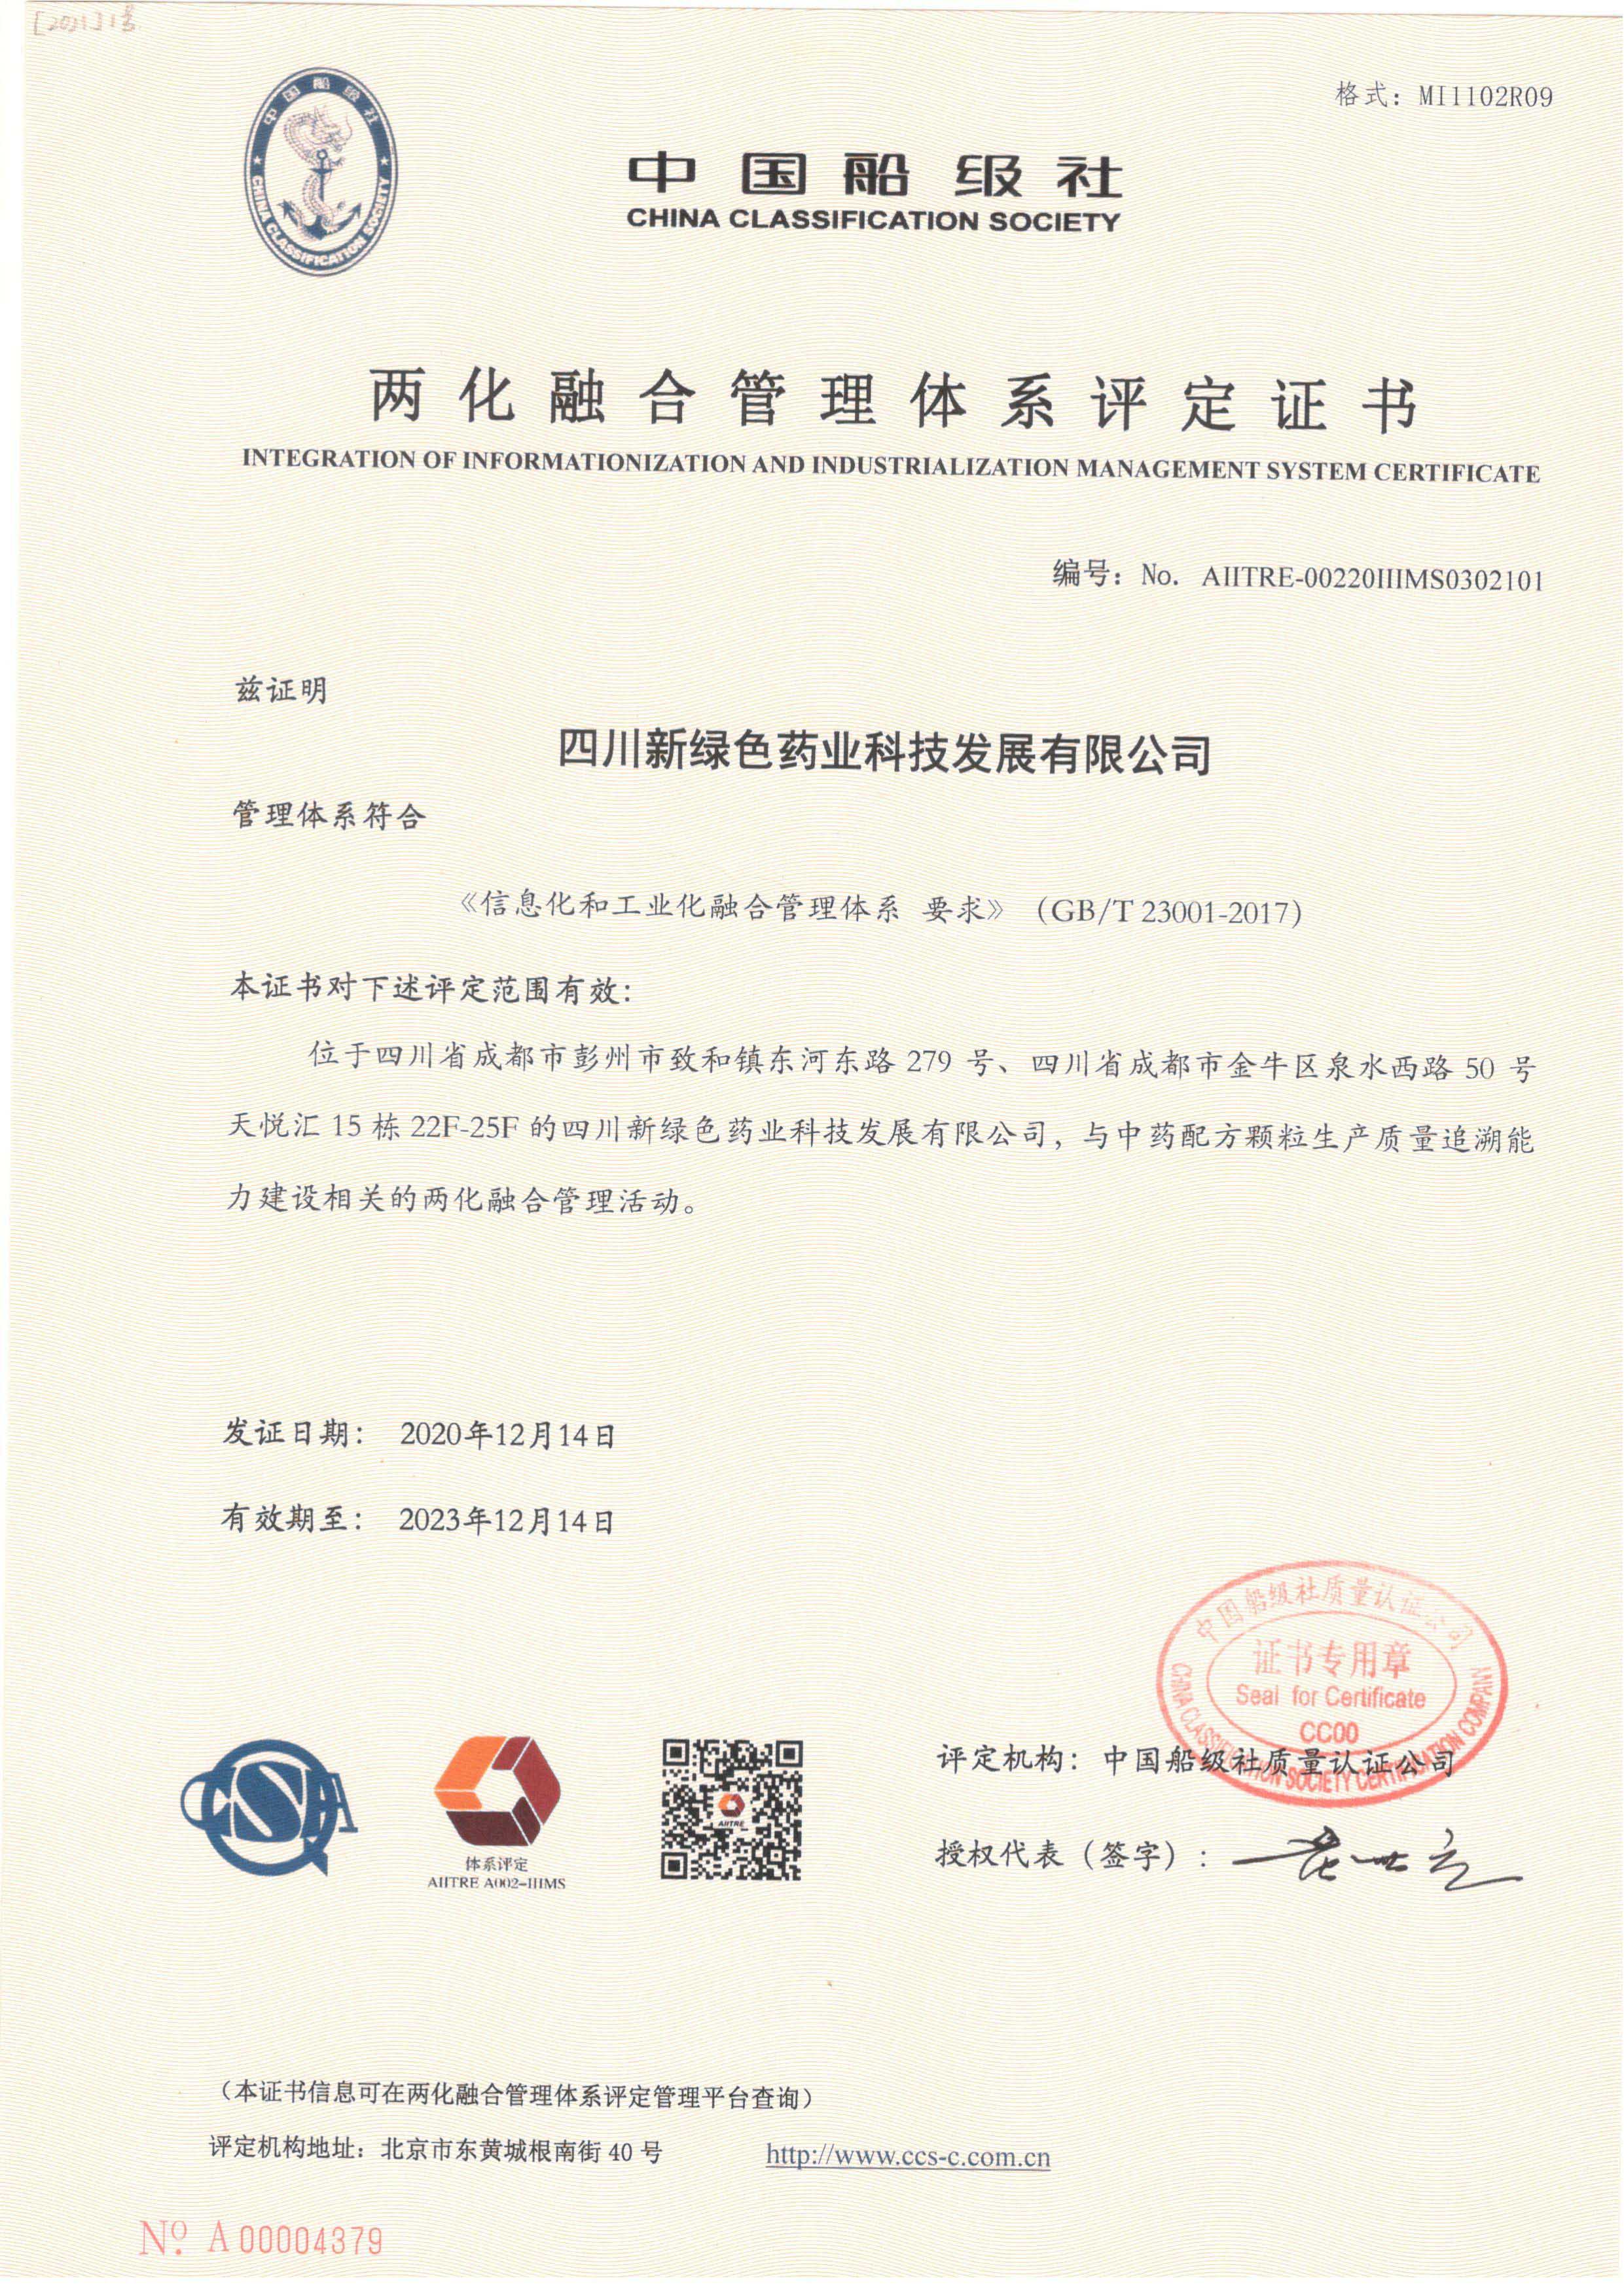 Evaluation certificate of integration of industrialization and industrialization management system